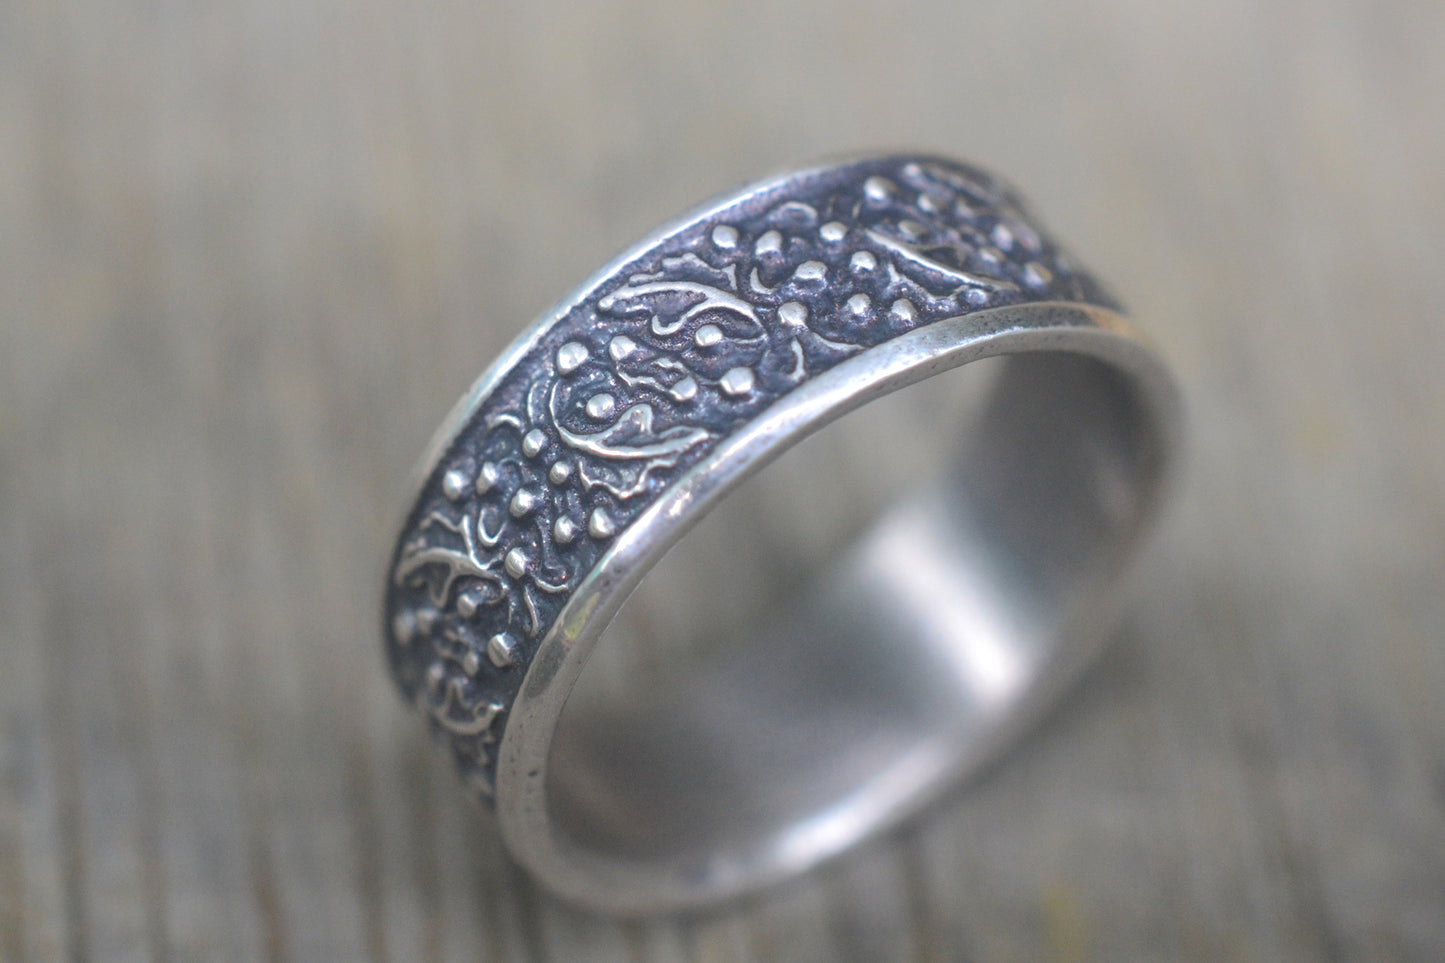 Handfasting Berry & Leaf Ring in Oxidised Silver